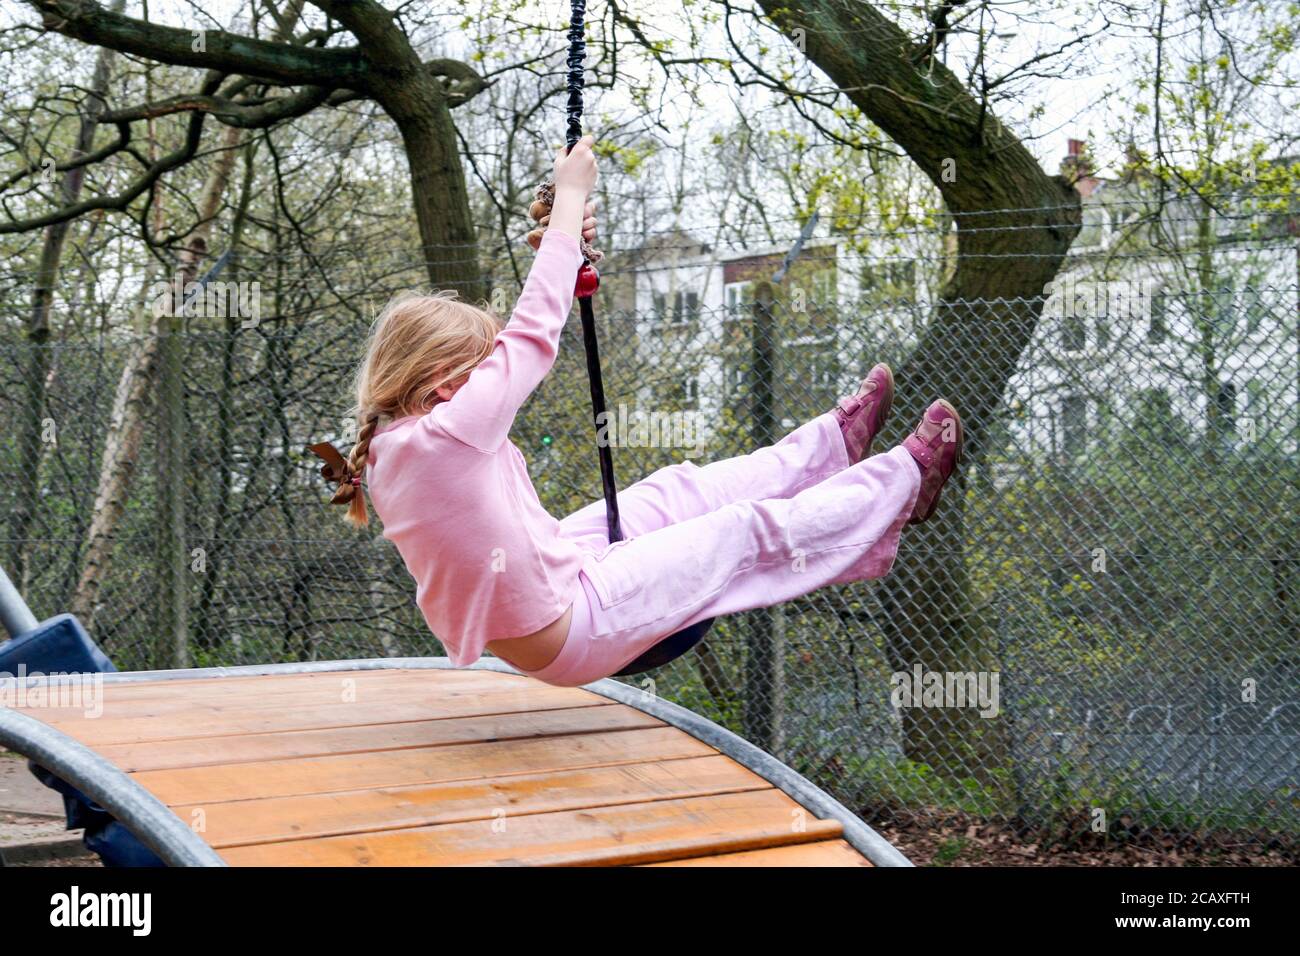 A 6-7 year old girl dressed in pink on a zip wire in a playground, London, UK Stock Photo